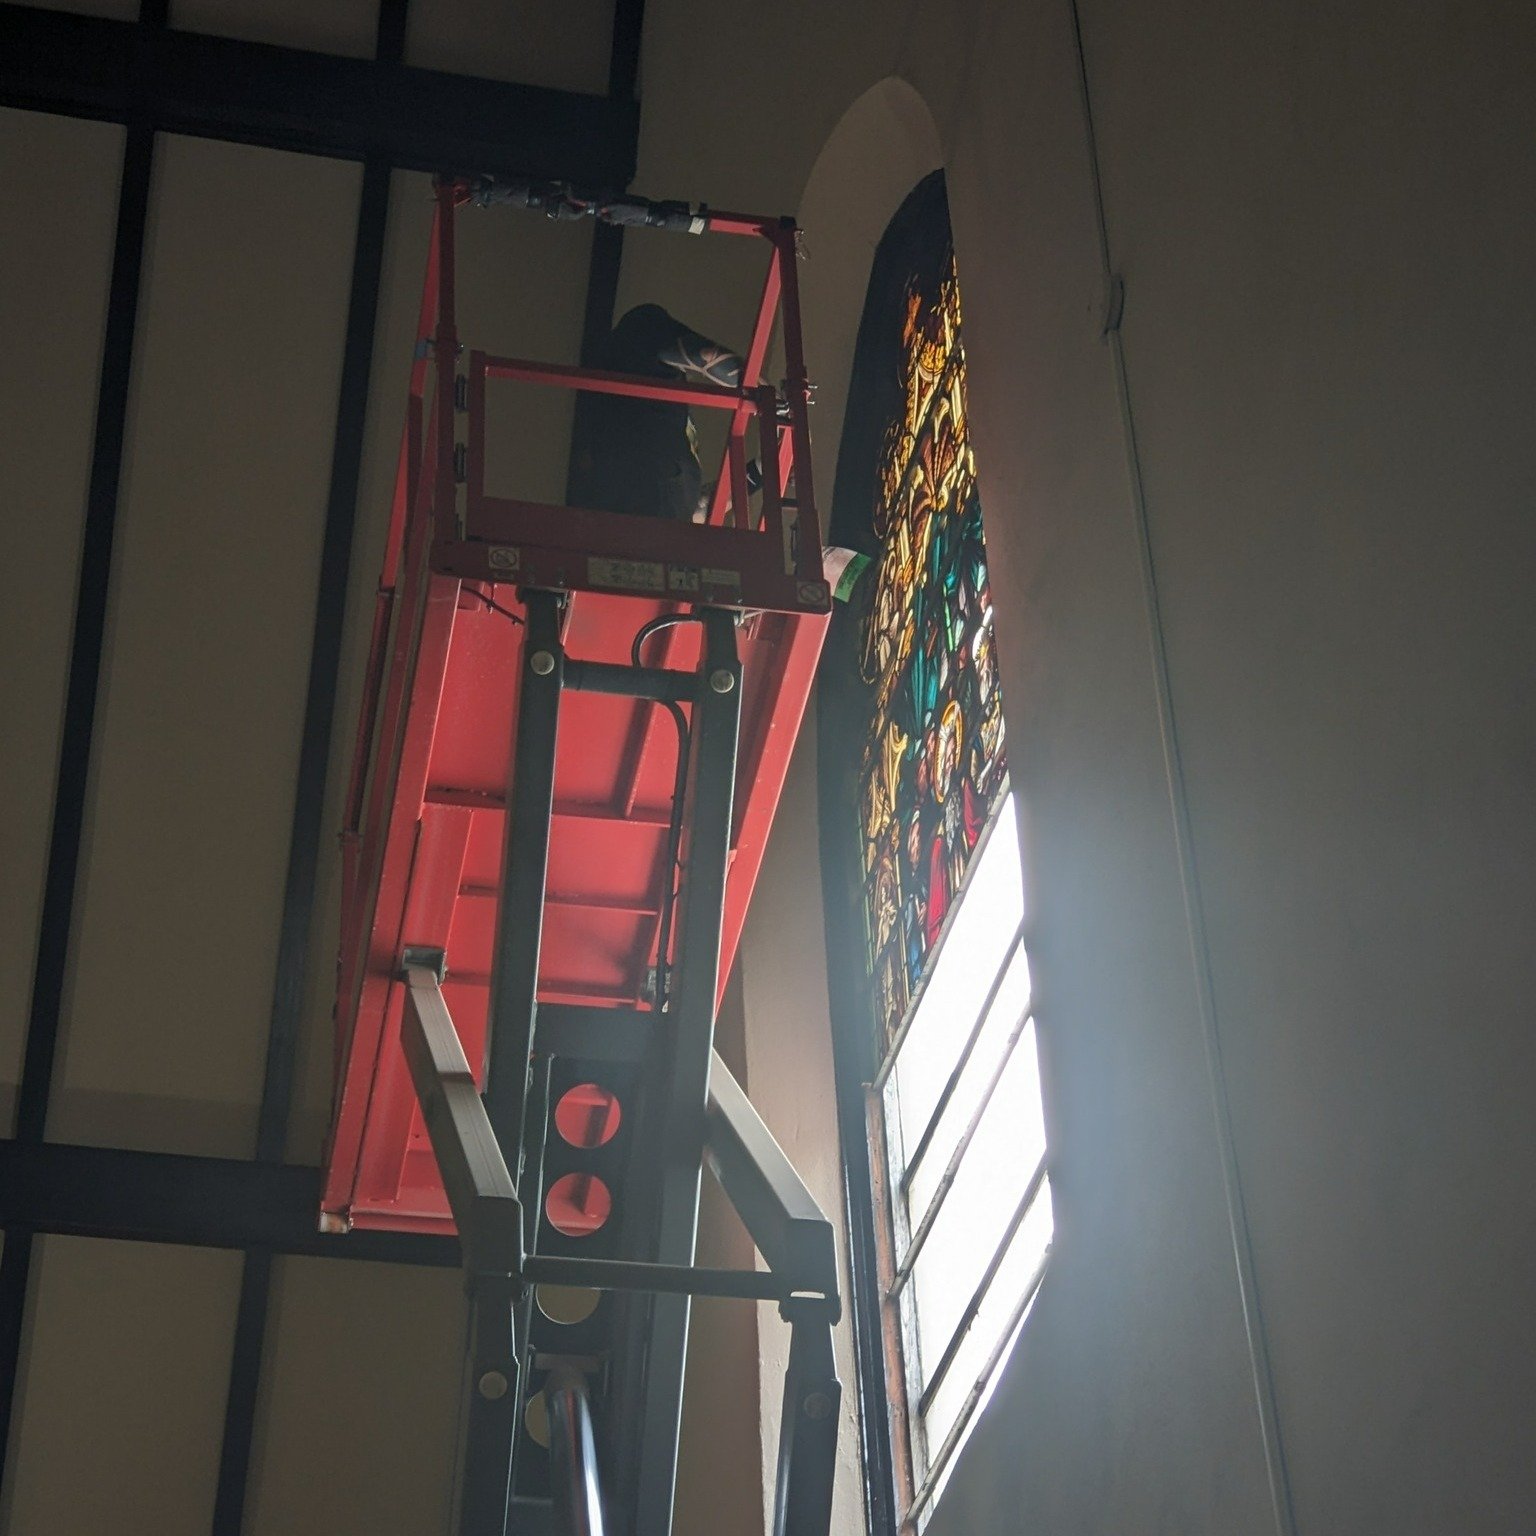 Two of our magnificent windows, on the west wall, and above the high altar on the east wall, have recently been removed for repairs and maintenance. Over the 123 and 98 years (respectively) that the windows have graced our church, the weight of the g